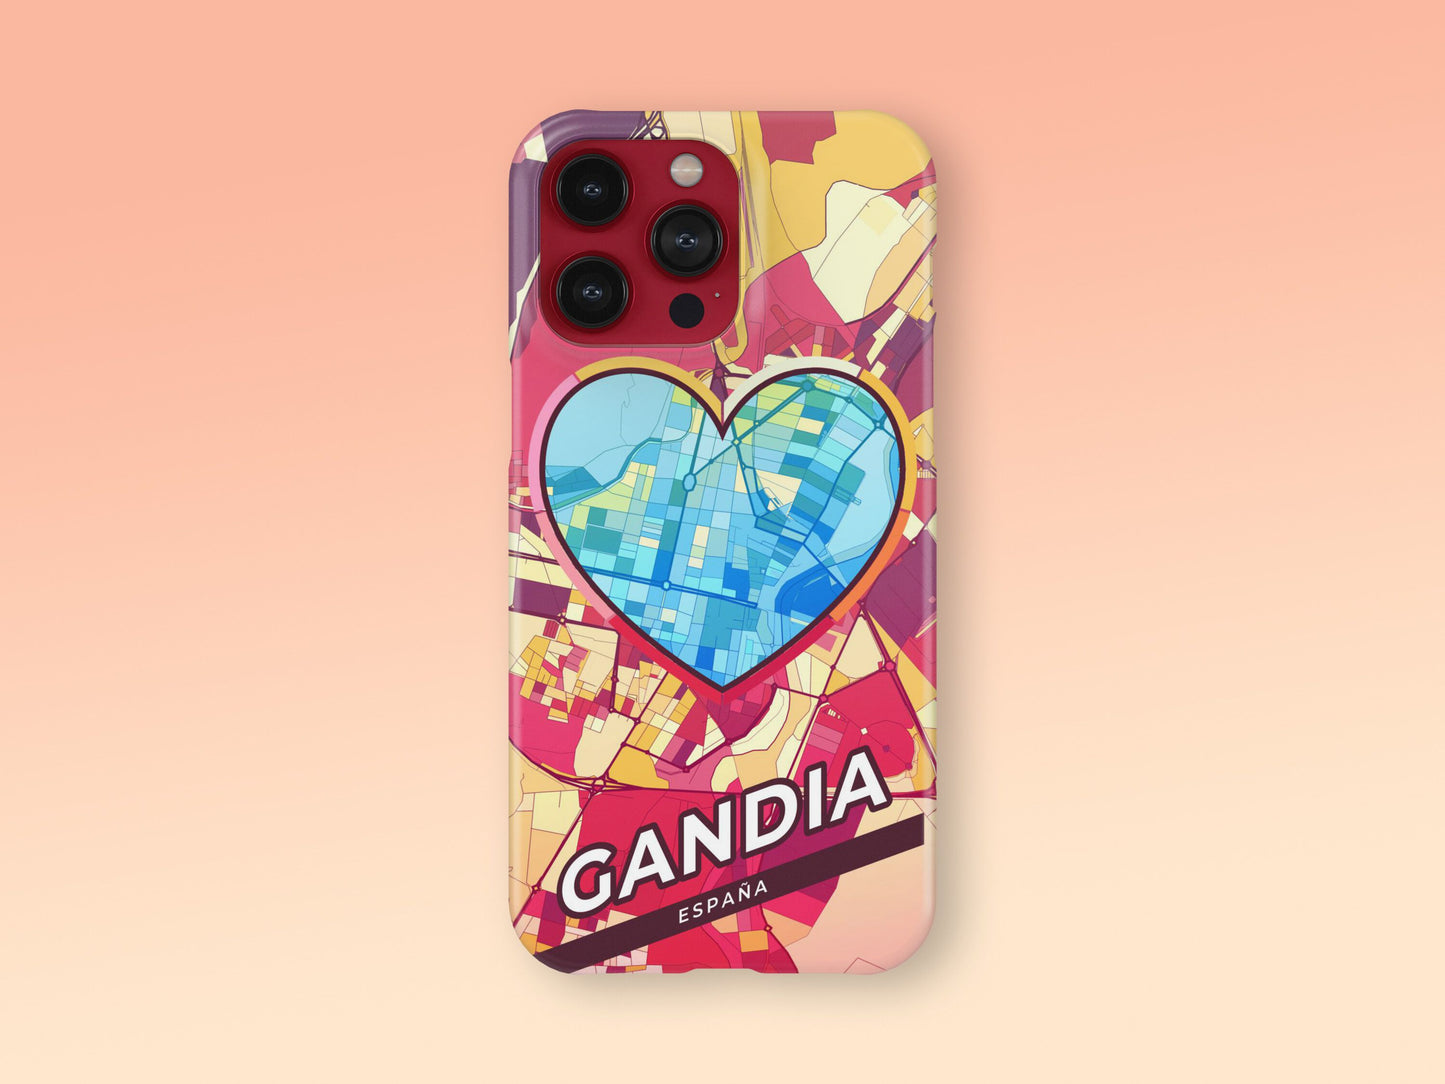 Gandia Spain slim phone case with colorful icon. Birthday, wedding or housewarming gift. Couple match cases. 2